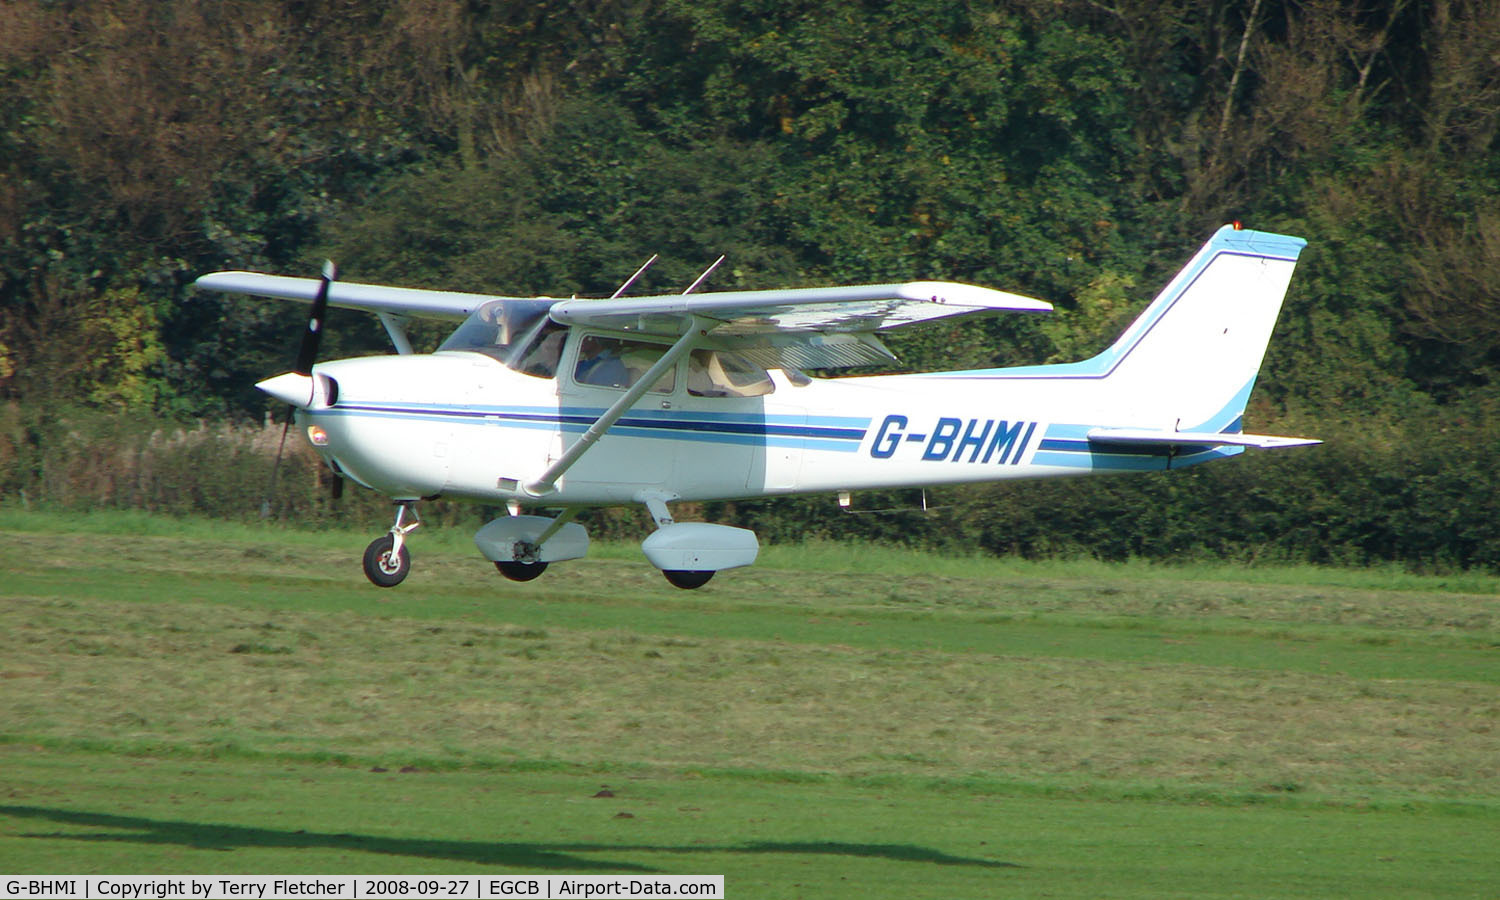 G-BHMI, 1980 Reims F172N Skyhawk C/N 2036, Cessna F172N photographed at Manchester Barton Open Day in Sept 2008